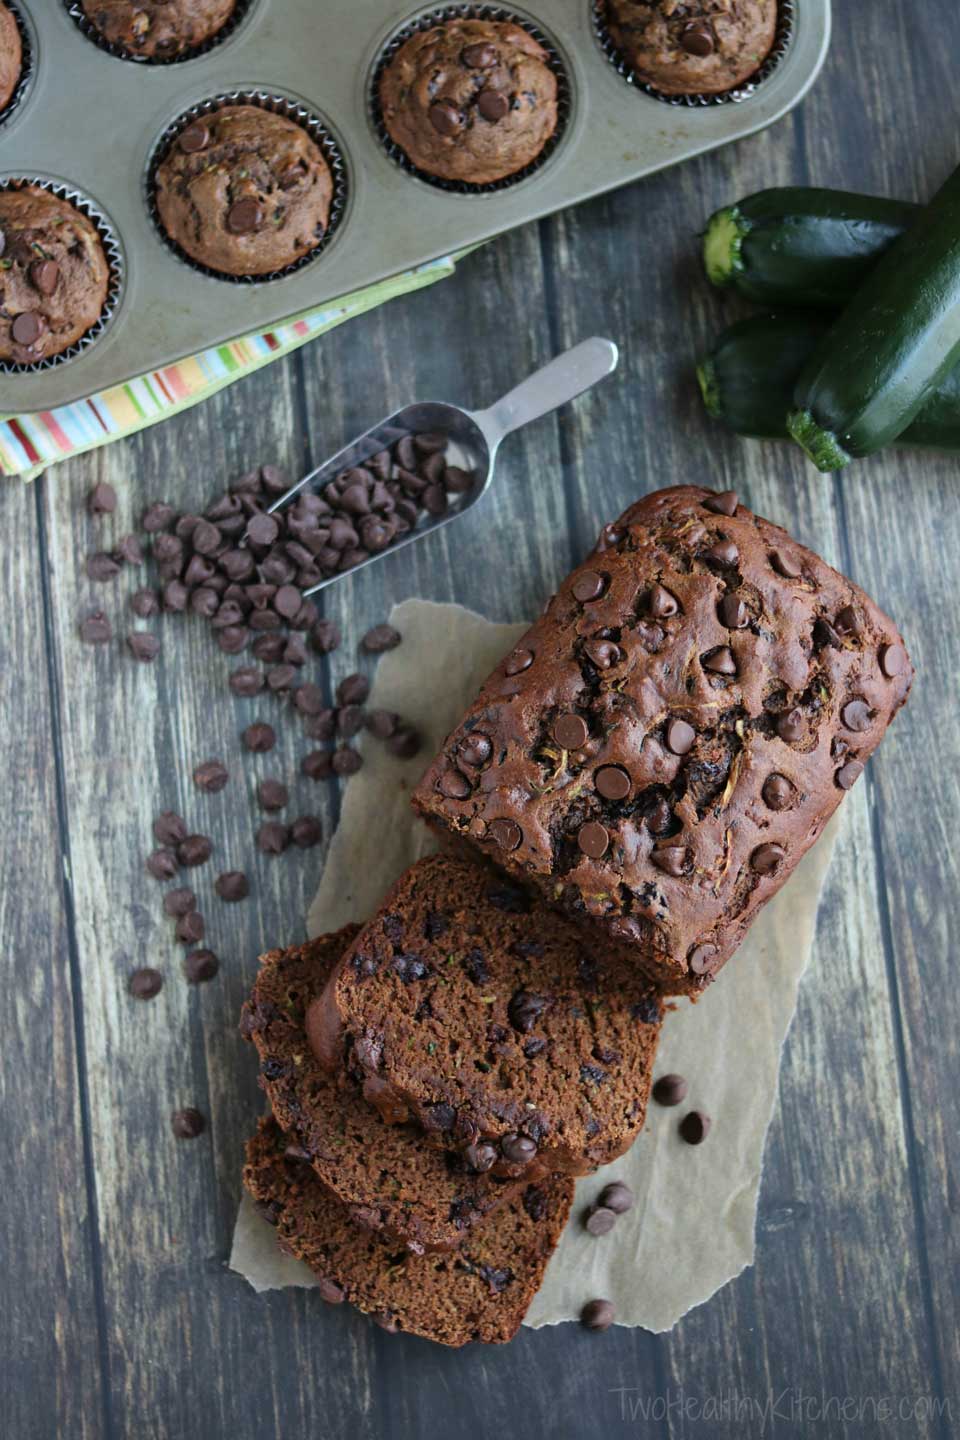 Luscious cherries & two layers of chocolate flavor! This decadent, rich Chocolate Zucchini Bread is dense, luxuriously moist, and studded with chocolate chips. Truly a chocolate lover's dream! And it’s a healthy zucchini bread recipe full of whole grains and very little extra fats! For quicker baking, this is a perfect zucchini muffin recipe, too! And this easy zucchini bread freezes beautifully – make a double batch to freeze for later, or to give as homemade gifts! | www.TwoHealthyKitchens.com